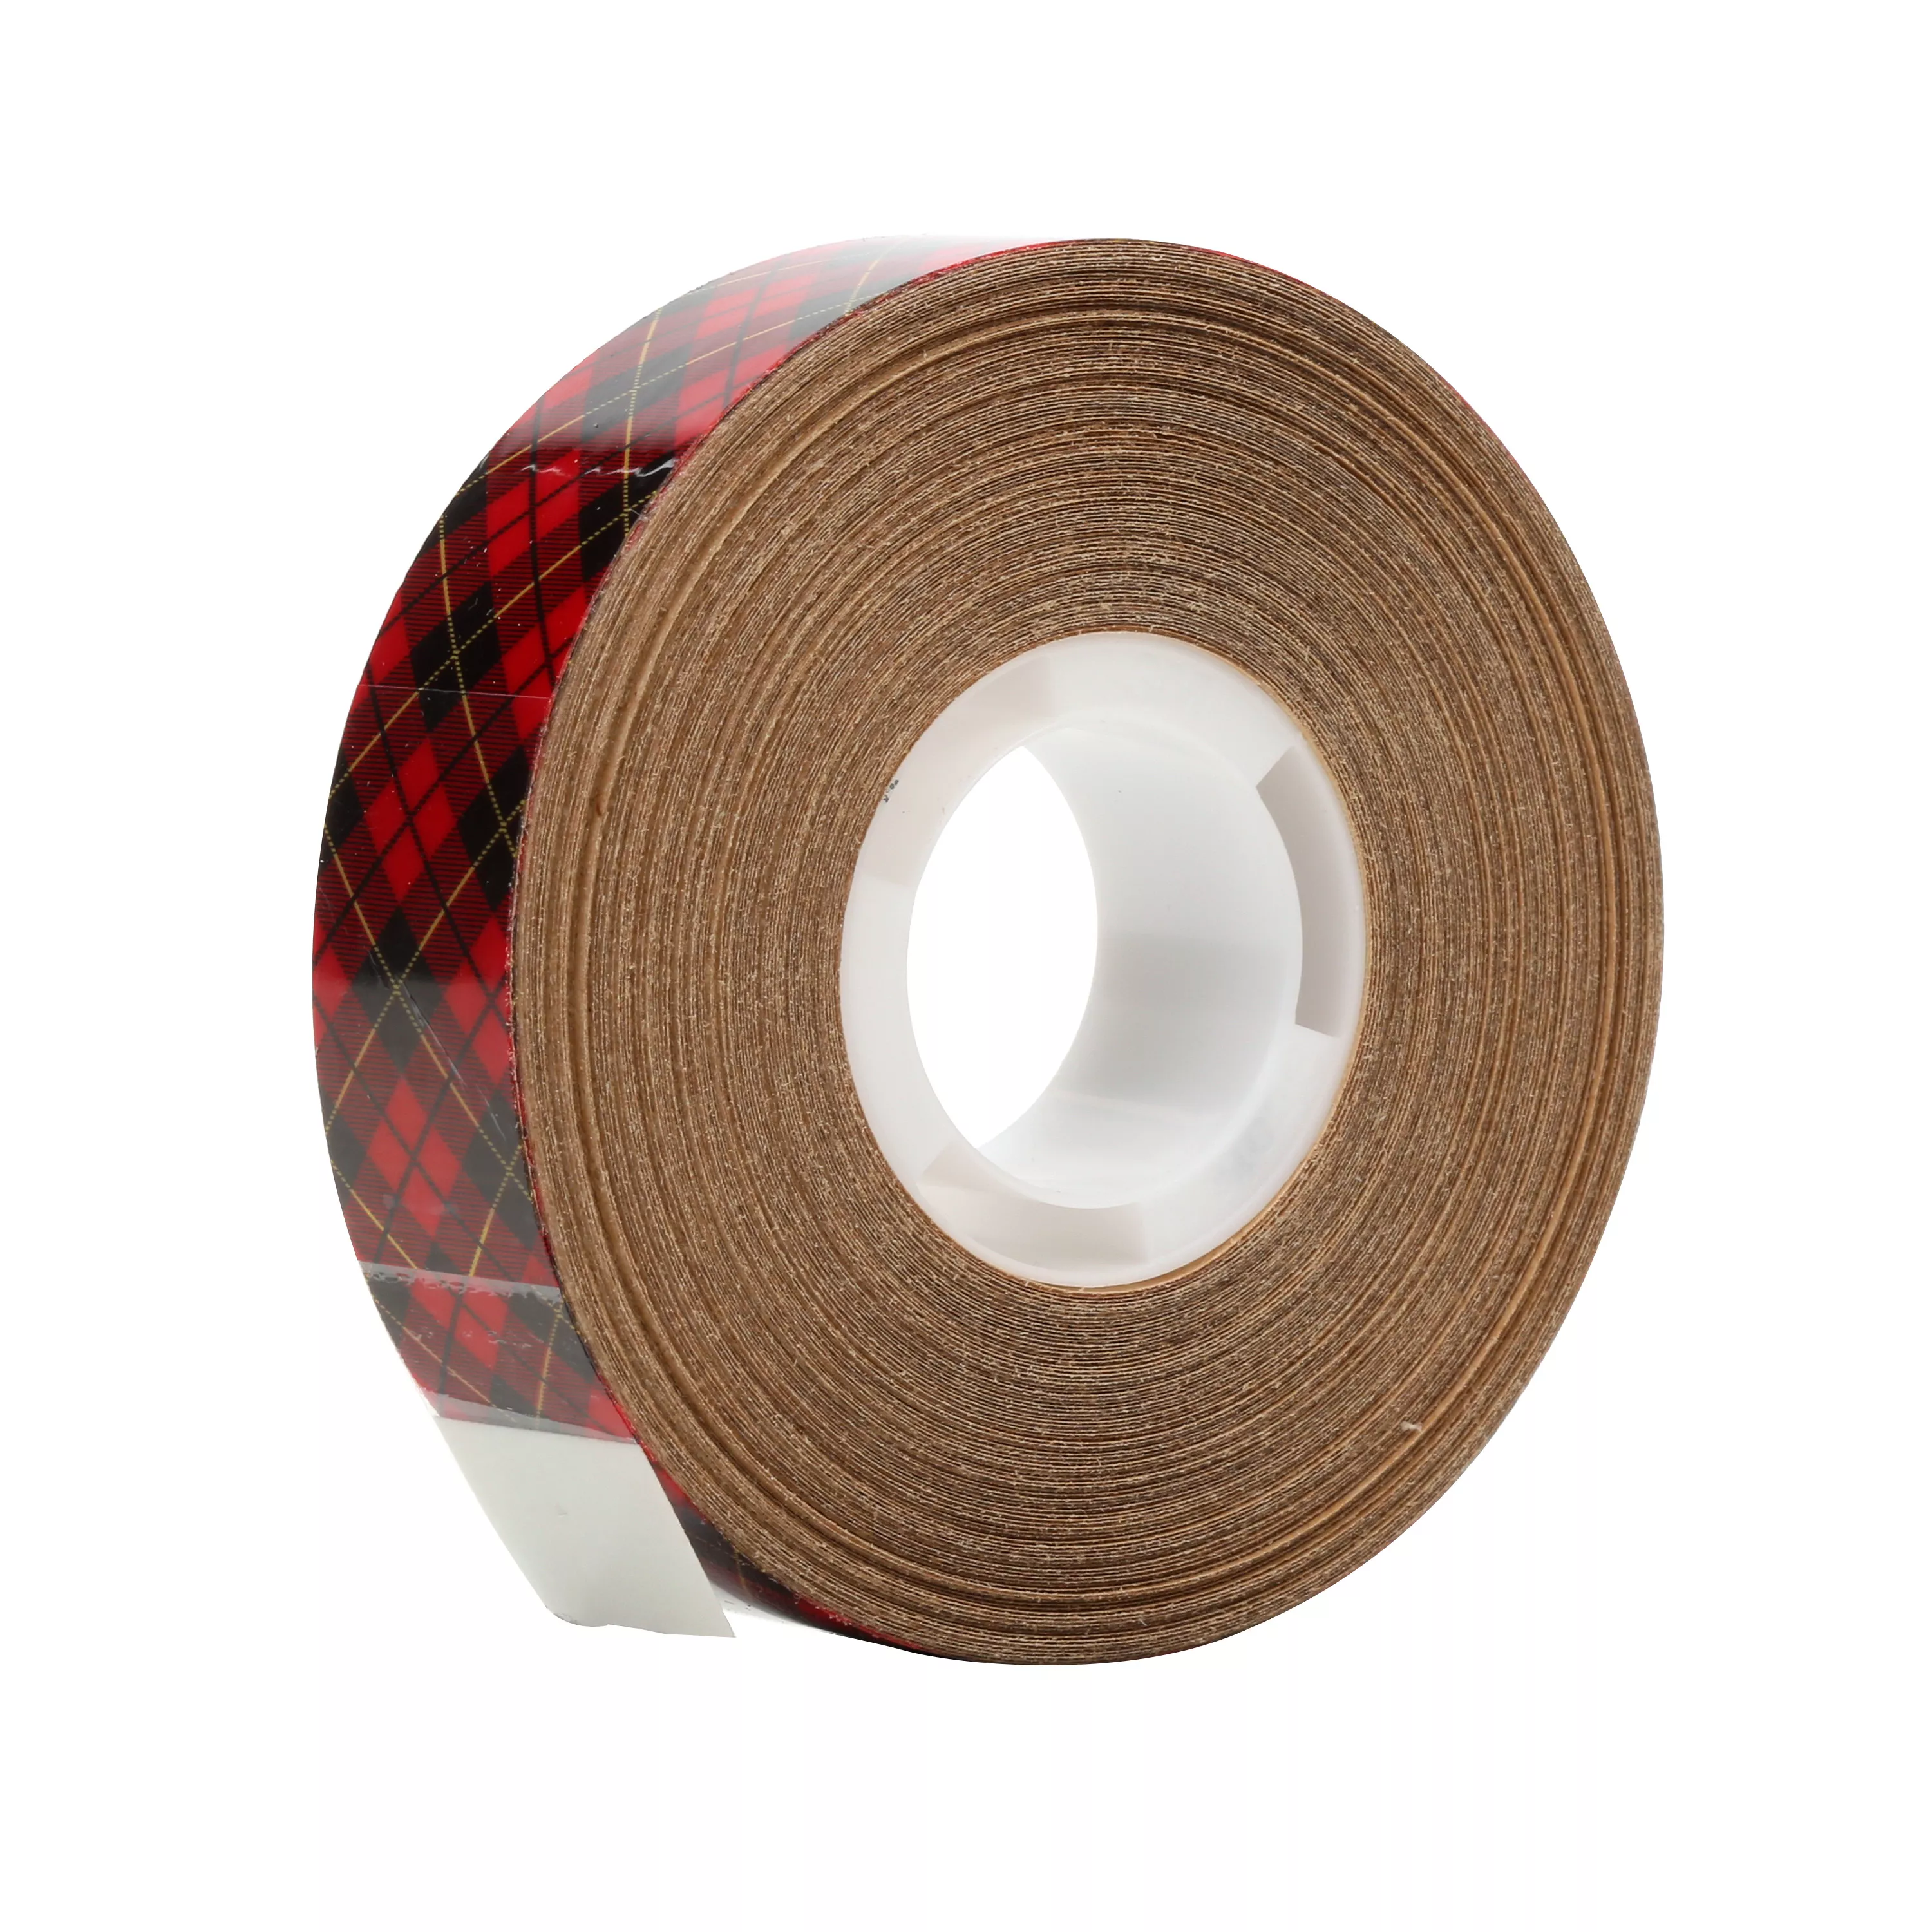 Scotch® ATG Adhesive Transfer Tape 969, Clear, 3/4 in x 18 yd, 5 mil,
(12 Roll/Carton) 48 Roll/Case